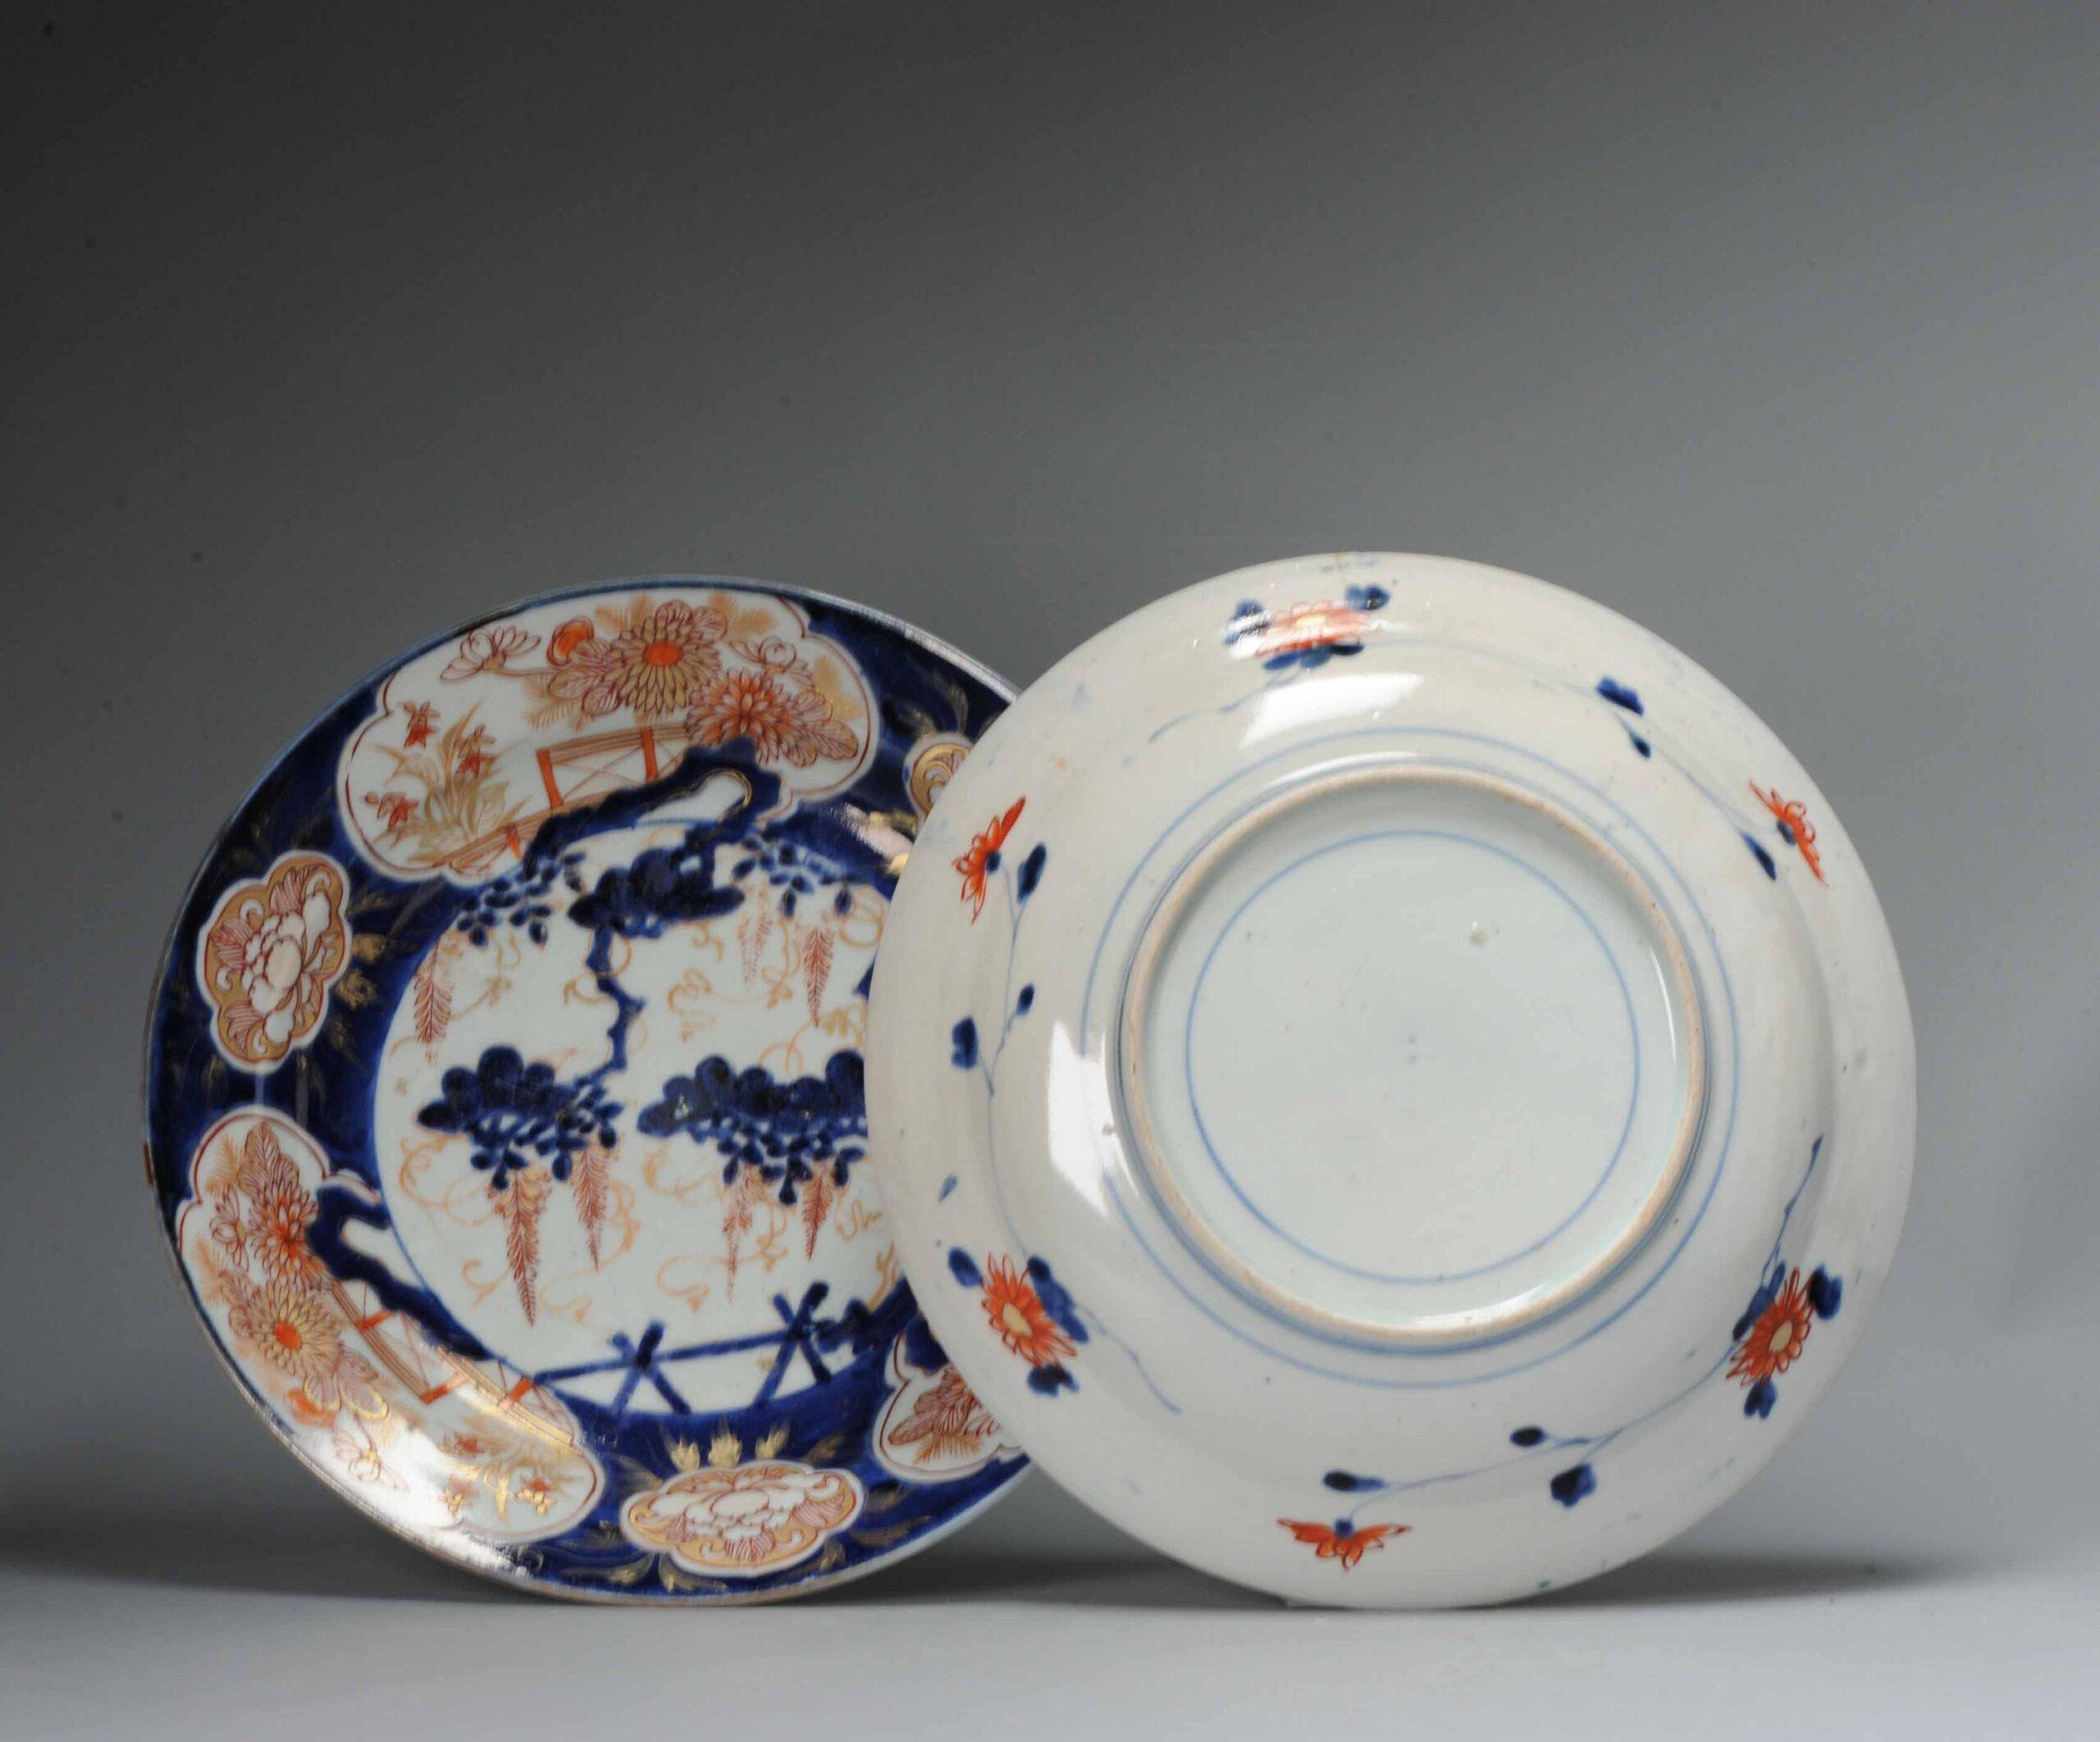 Sharing with you this very nice edo period, 1680-1710, example in perfect condition. With a garden floral scene and the border also has small Foo dogs/Qilin. Unmarked at the base.

Additional information:
Material: Porcelain & Pottery
Category: